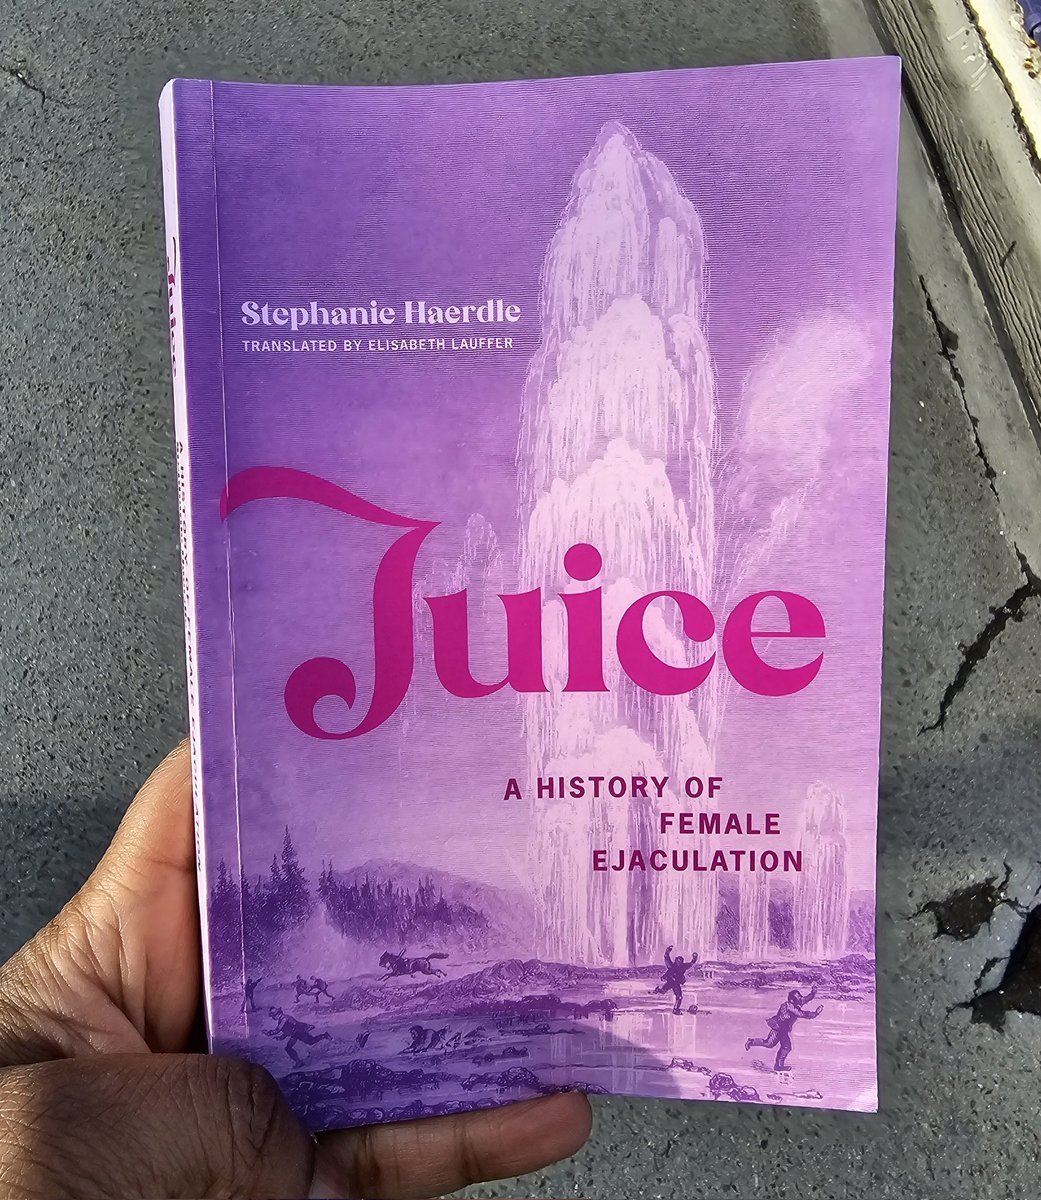 REVIEW: Juice: A History of Female Ejaculation by Stephanie Haerdle @stephaniehaerdle offers a fascinating and well-researched account of a taboo topic. It traces the cultural history of the female gush emitted during sexual pleasure. The book examines the different cultural